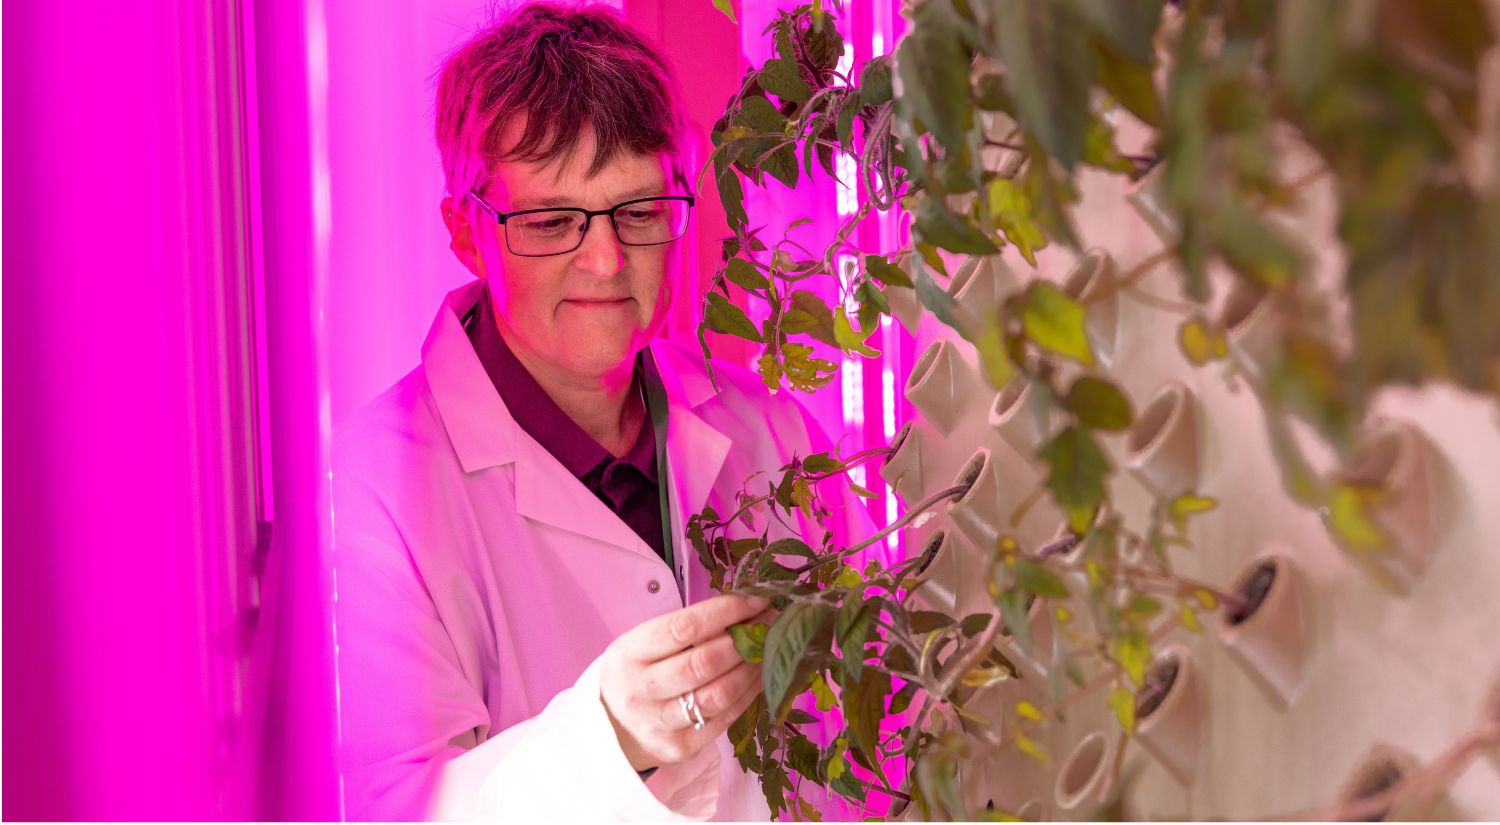 Professor Tracy Lawson examines the plants being grown in the vertical farm